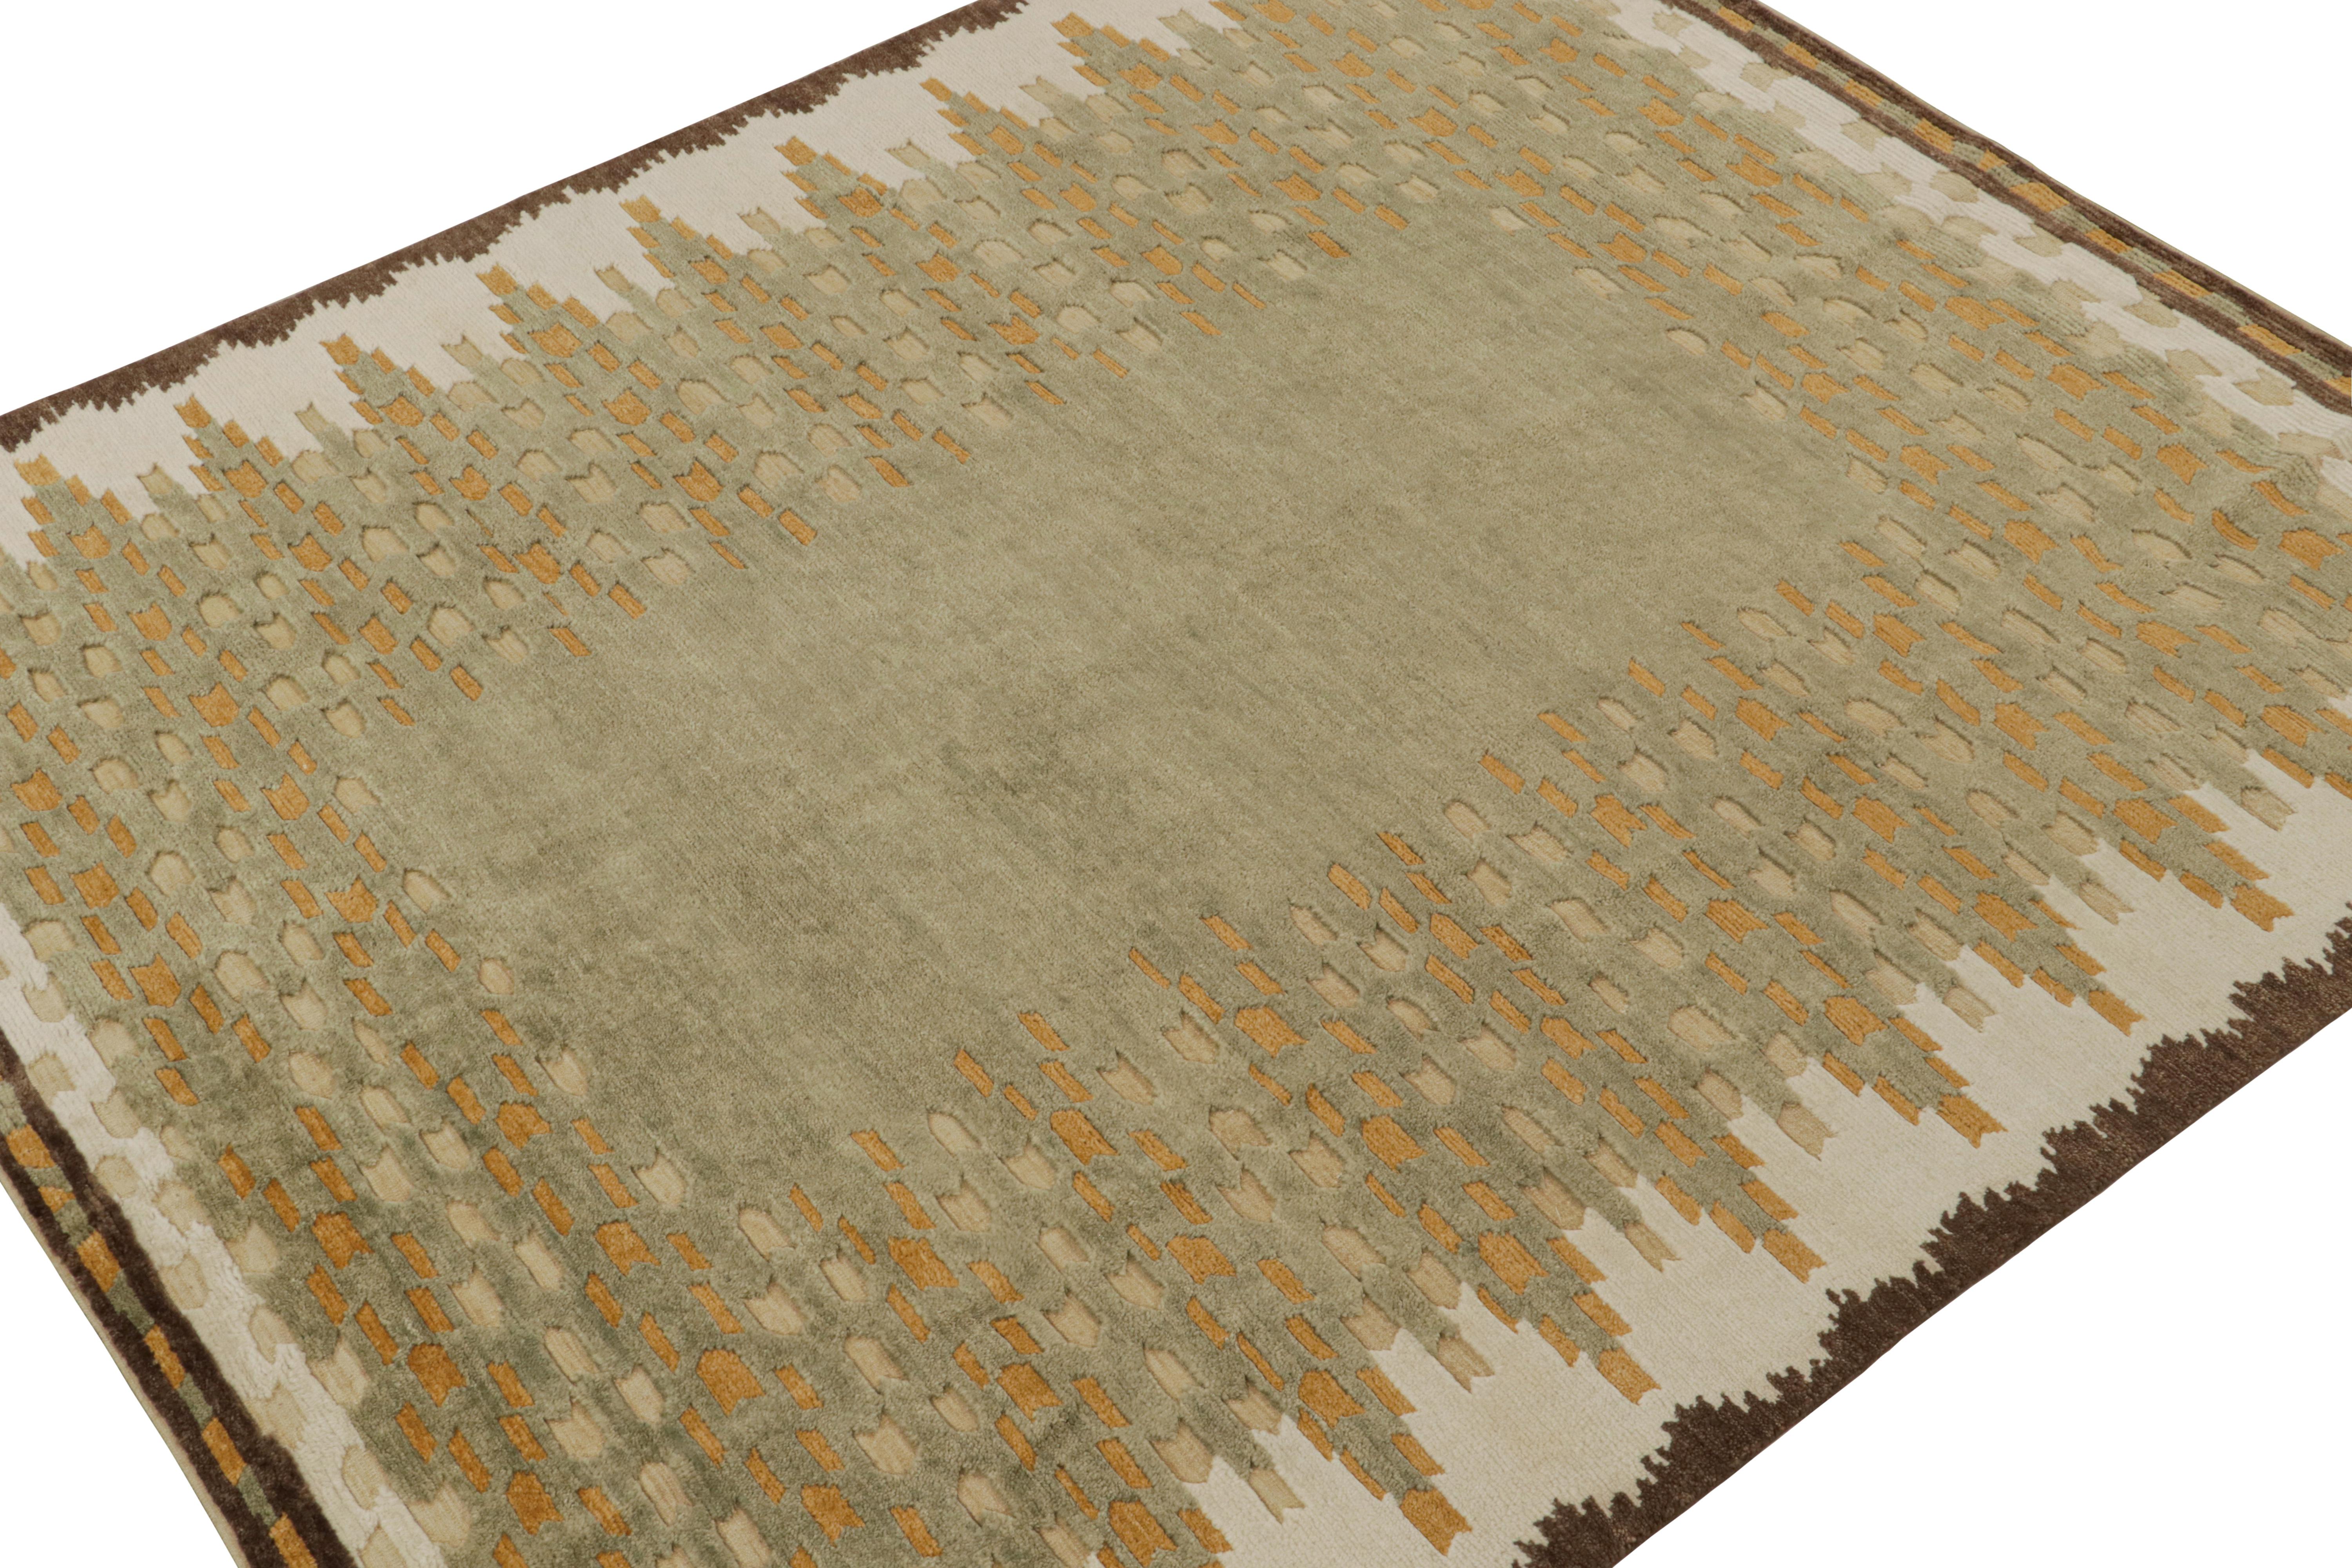 Hand-knotted in wool, this 8x10 modern rug represents the pile texture from the Scandinavian rug collection by Rug & Kilim.

On the Design:

Connoisseurs will admire this as a contemporary reimagining of Rollakhan and Rya rugs in the Swedish Deco